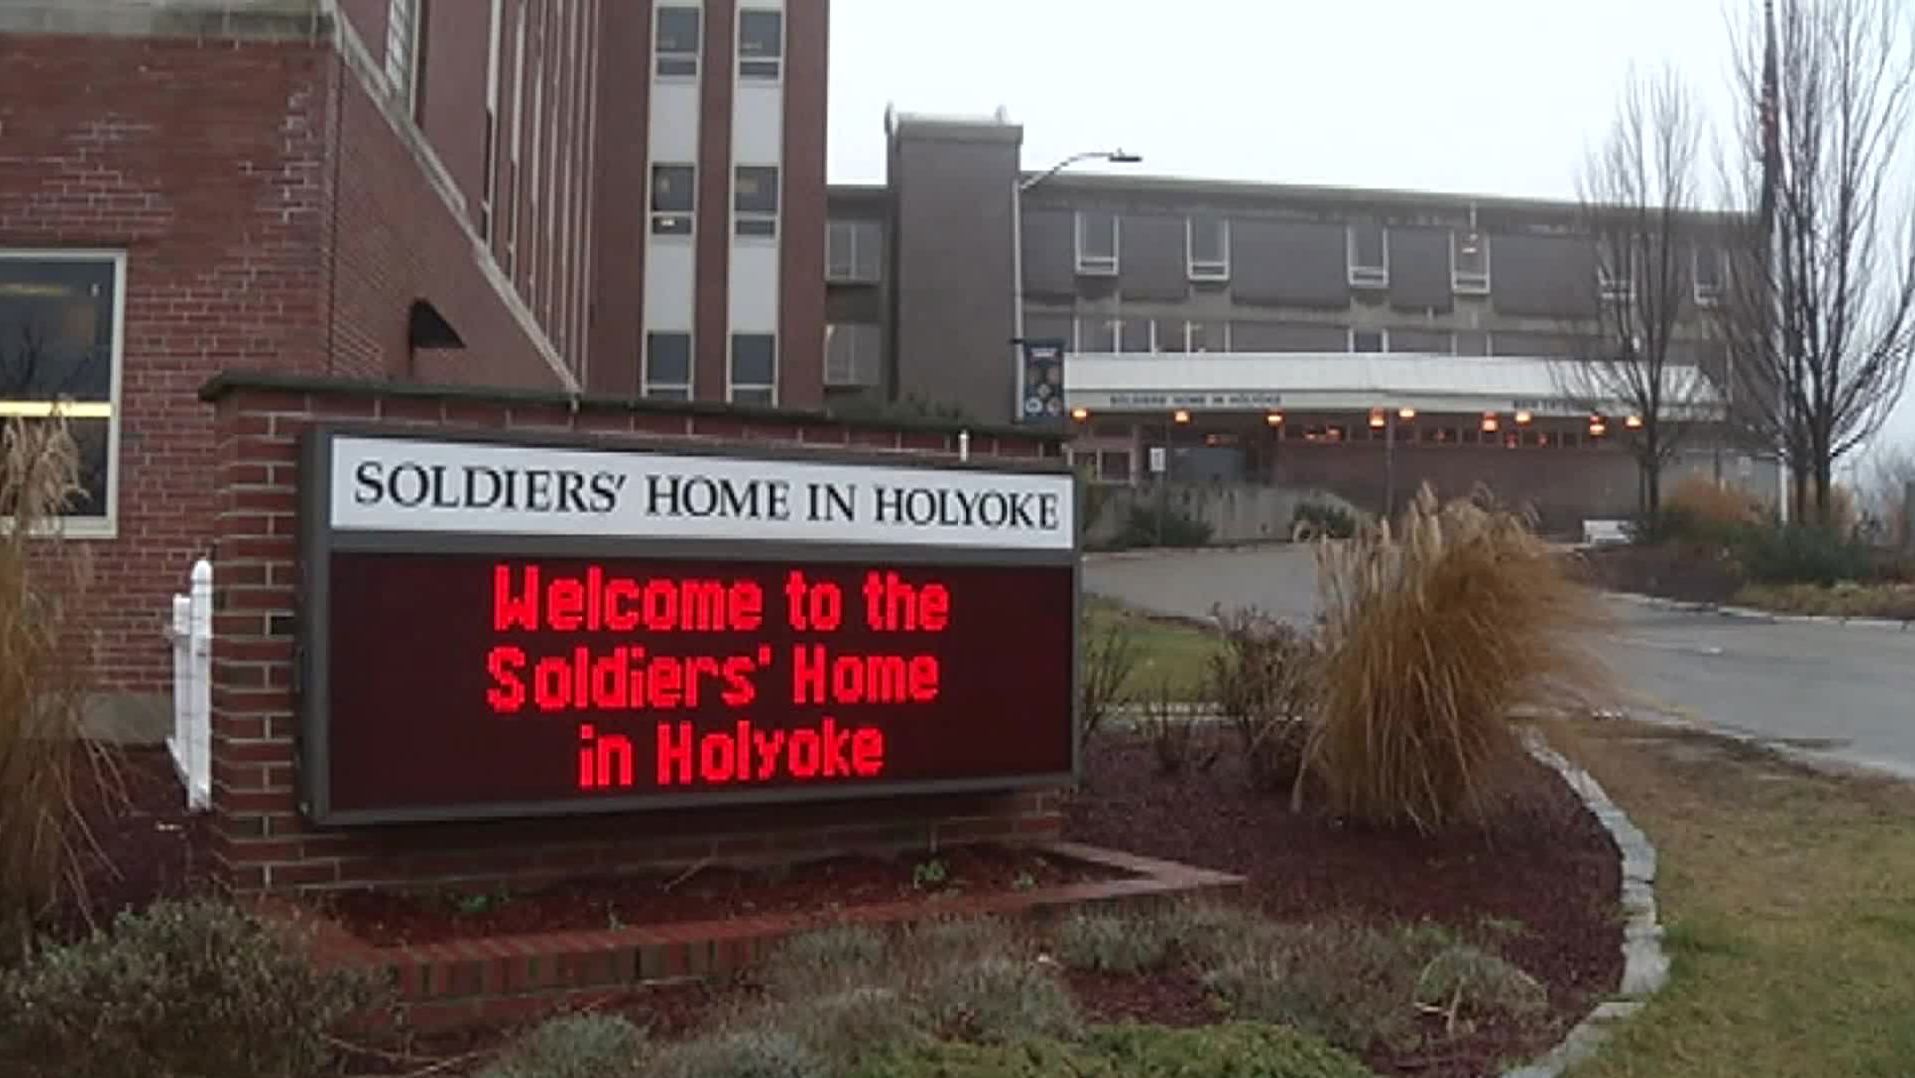 At least 12 veterans have died at Soldiers' Home in Holyoke, Massachusetts, from Covid-19.